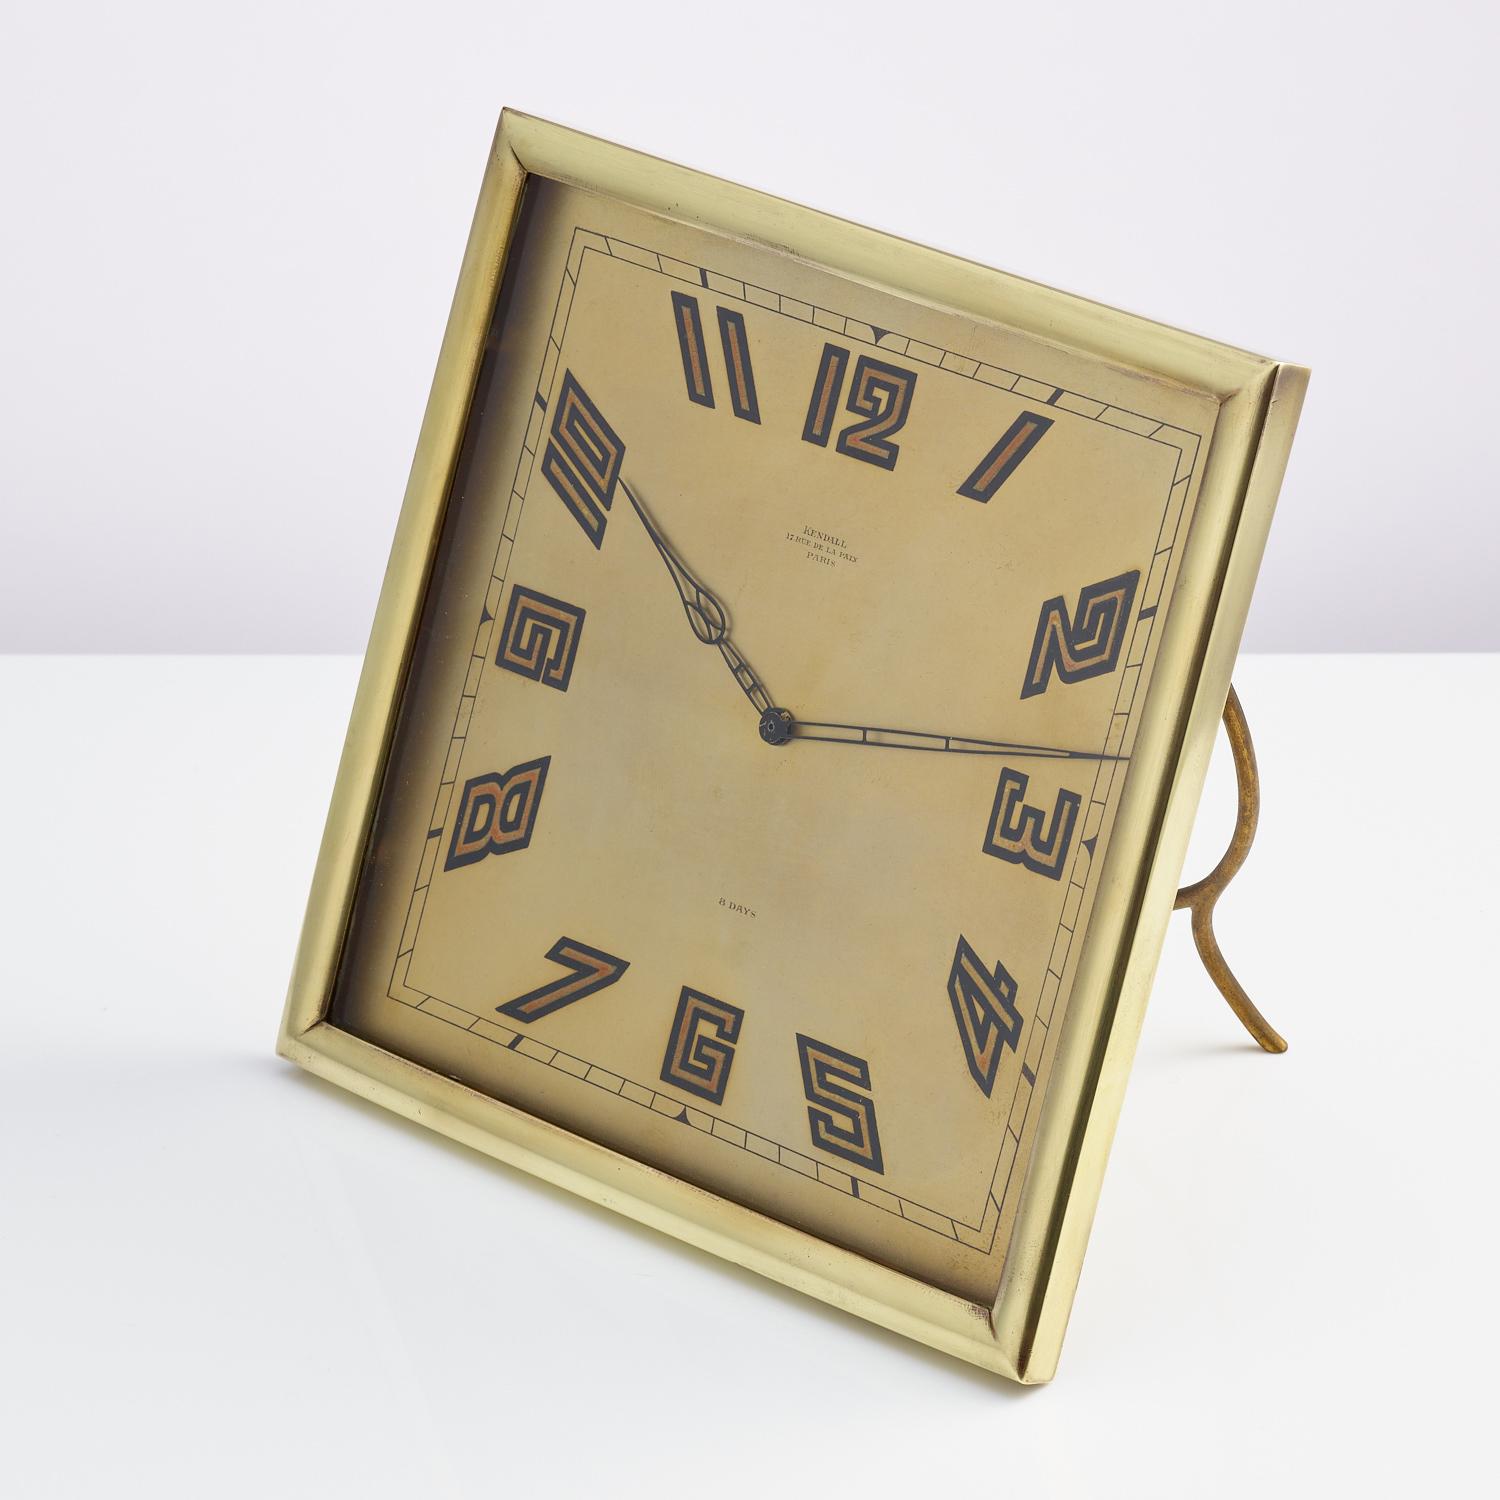 Large Art Deco desk clock made by Kendall of 17 Rue de la Paix, Paris, circa 1930

This clock is a good size and is in good working order, the base metal is brass and it stands on a easel back.
 
 